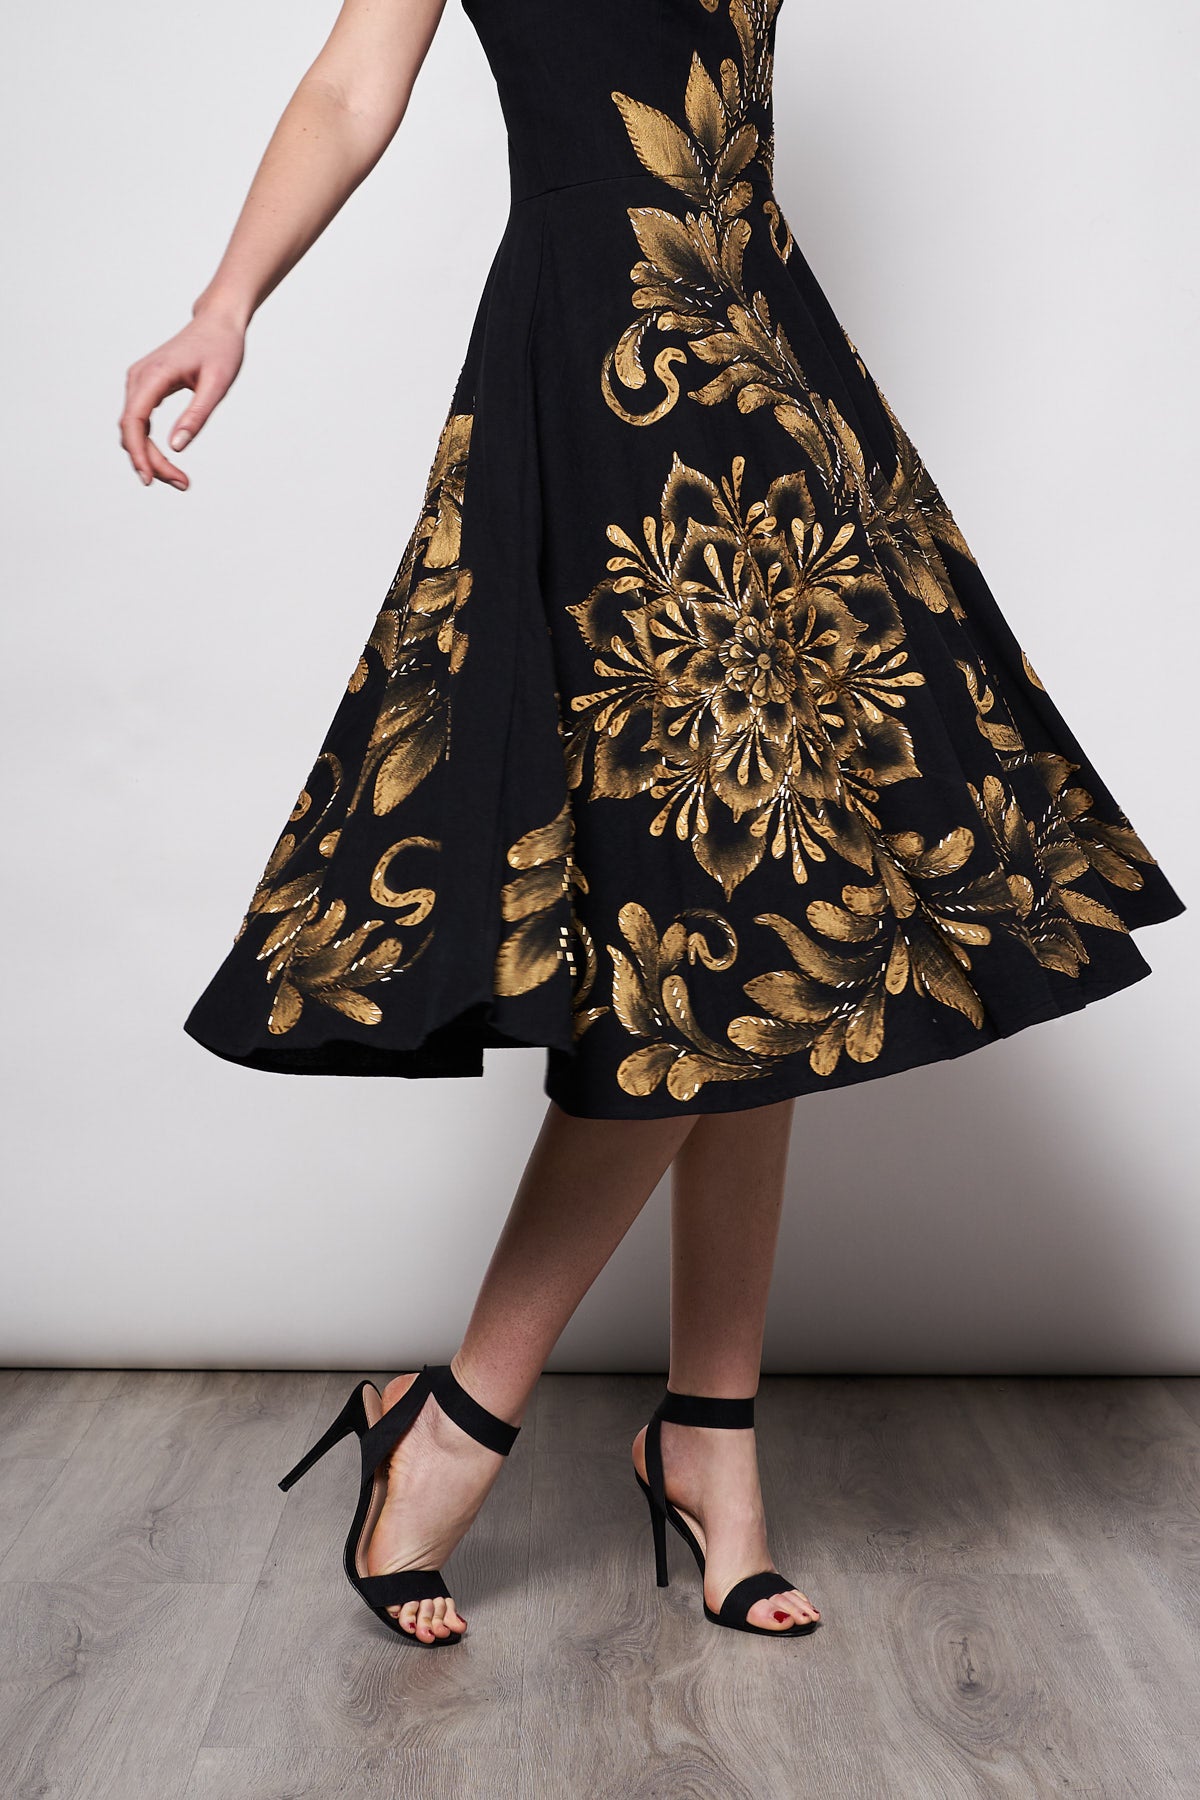 HAND-PAINTED AND HAND-EMBROIDERED MIDI DRESS - TALAVERA ORO